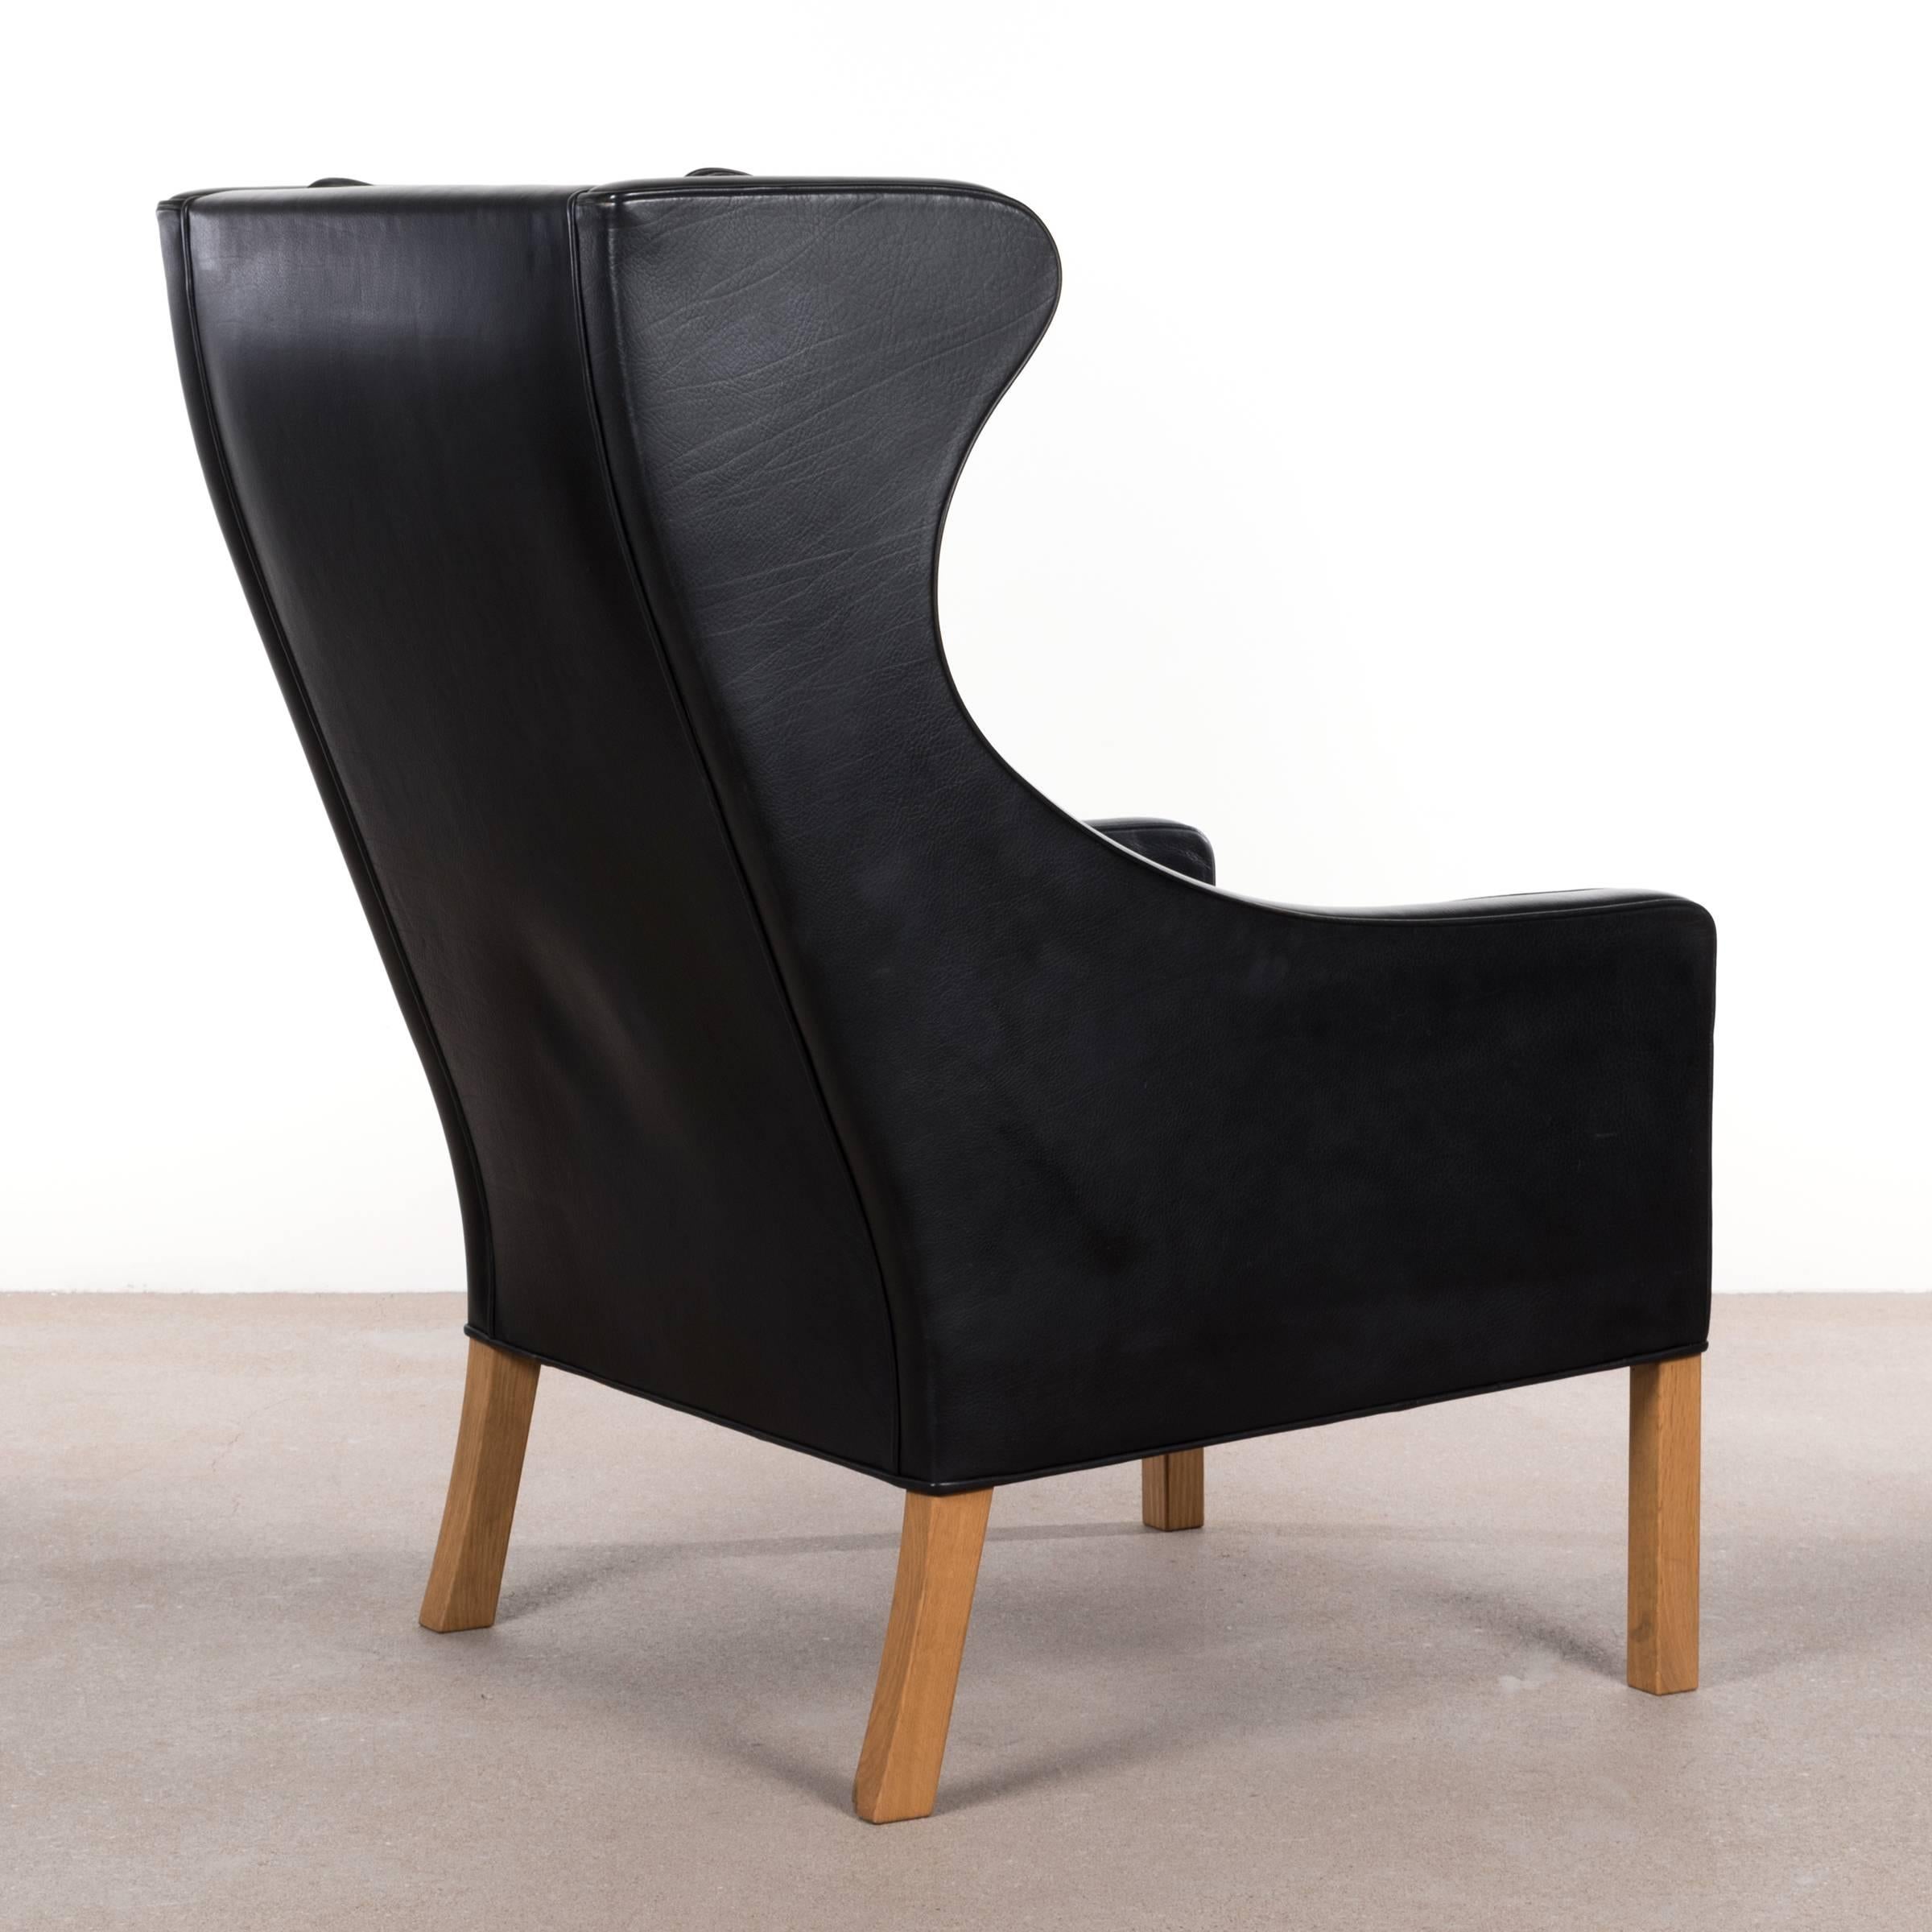 Fantastic and very comfortable thick leather wingback designed by Børge Mogensen in 1963 for Fredericia Stolefabrik, Denmark. Very good original condition with light patina. Signed with manufacture label and serial number.

Free shipping for